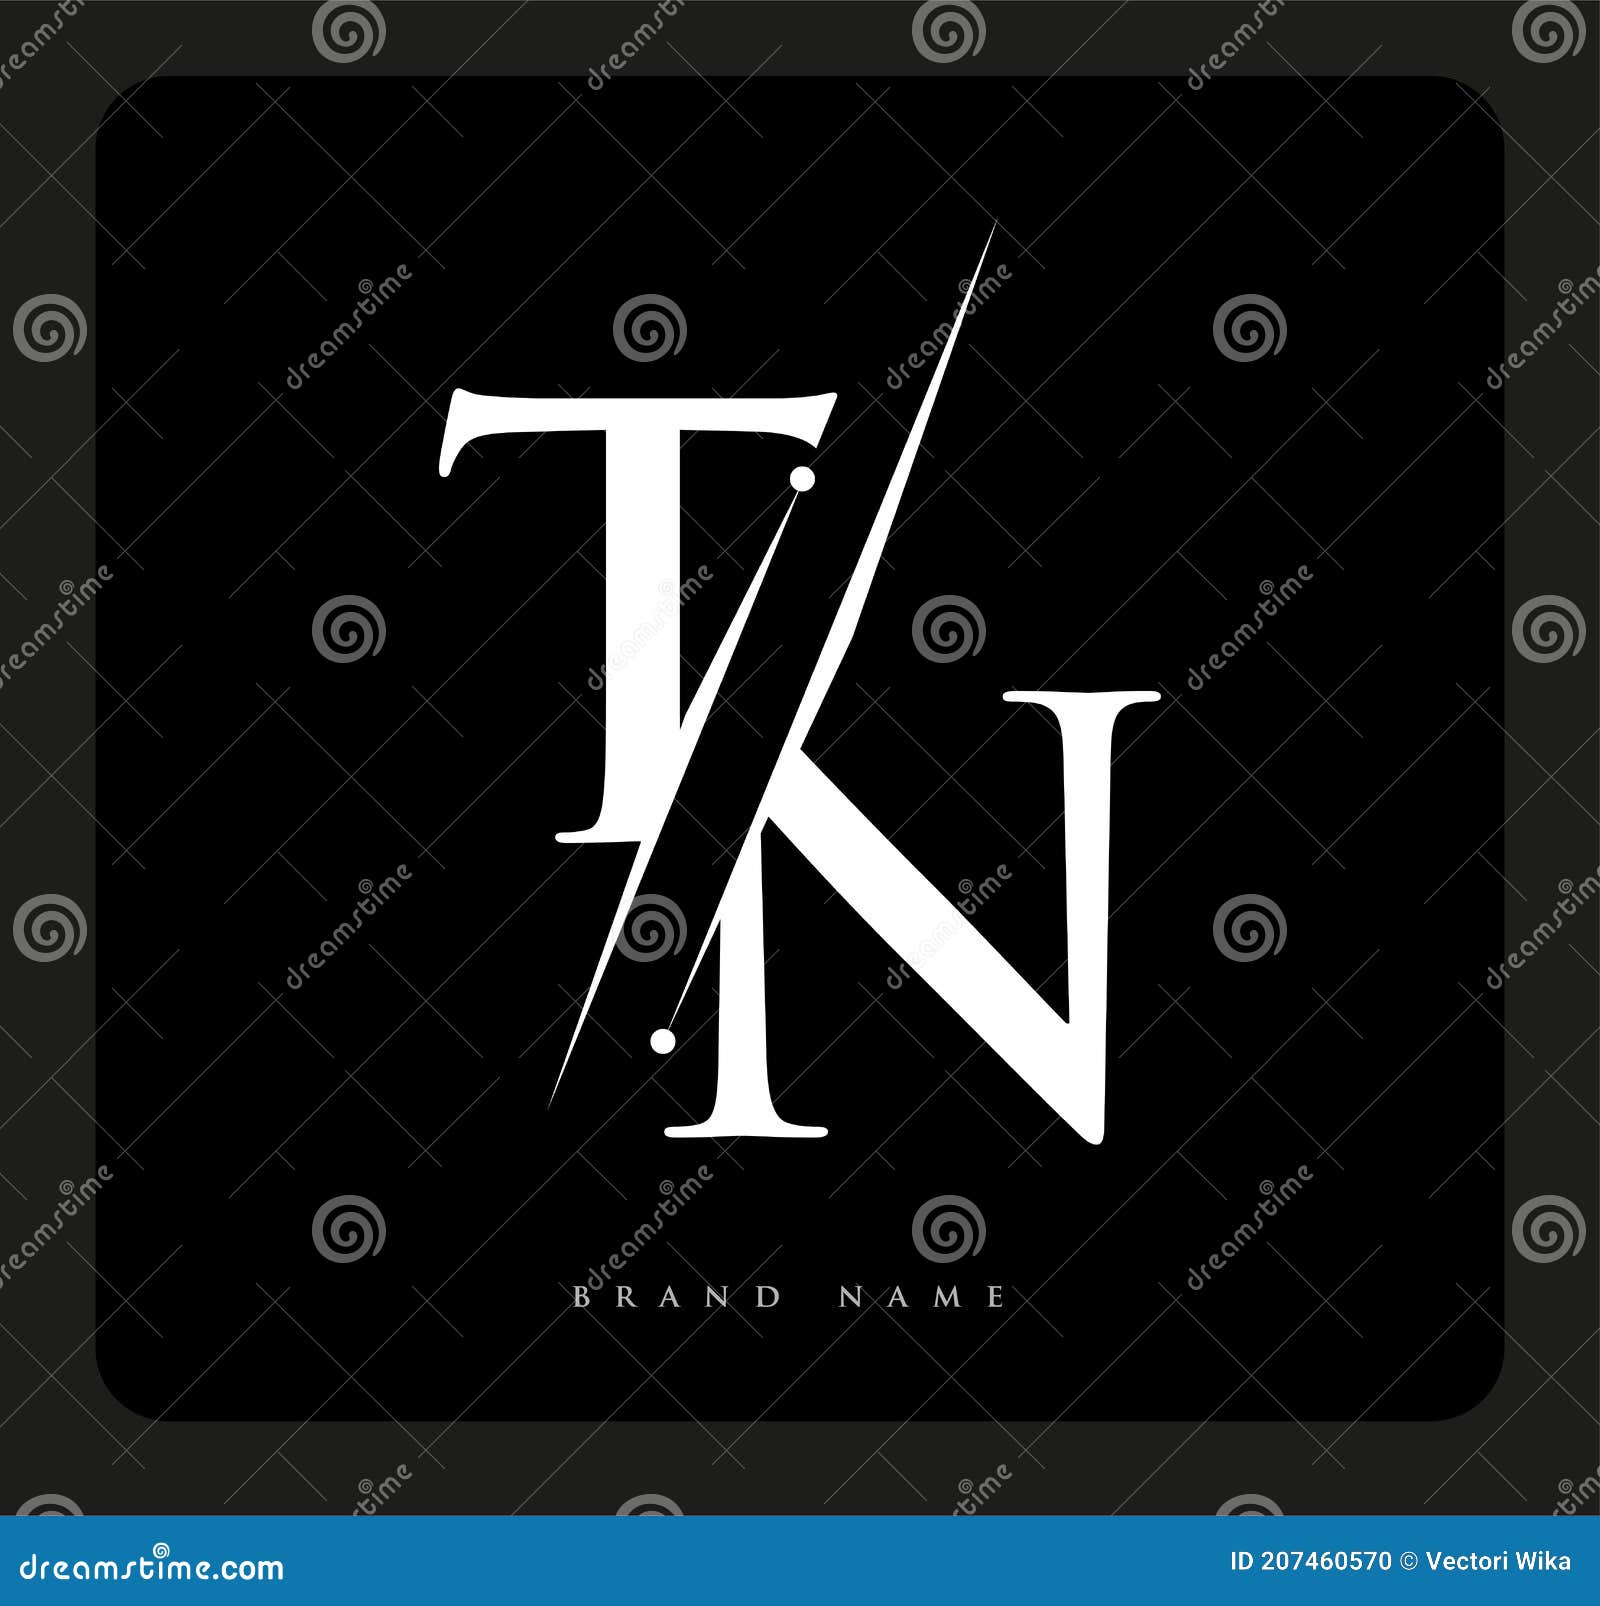 TN Initial Logo Company Name Colored Gold And Silver Swoosh Design